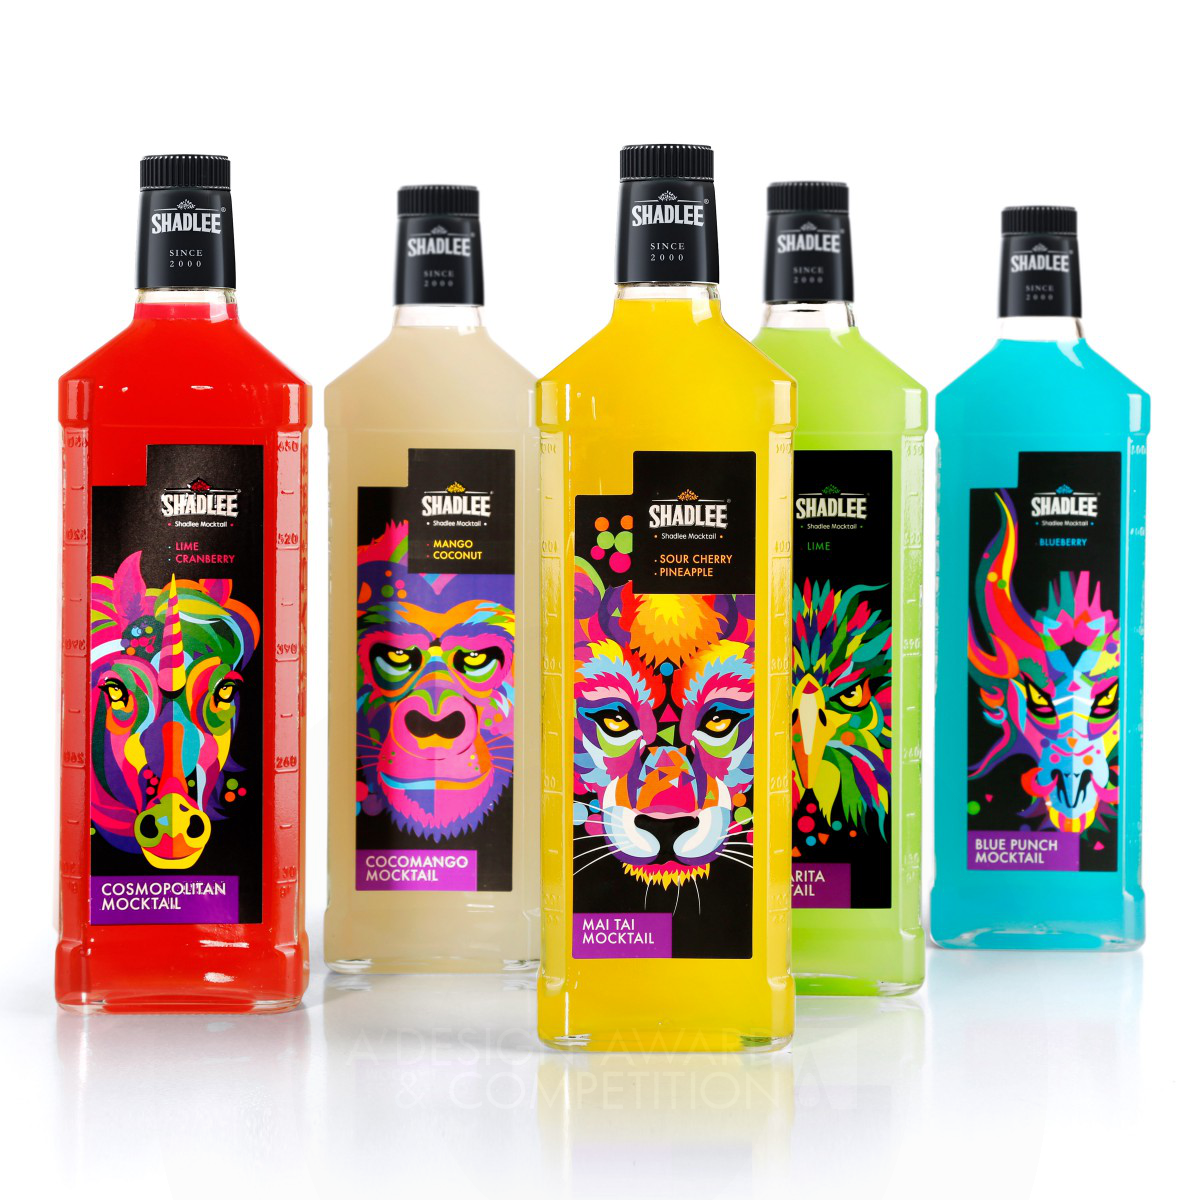 Shadlee: A Colorful and Attractive Mocktail Drink Design